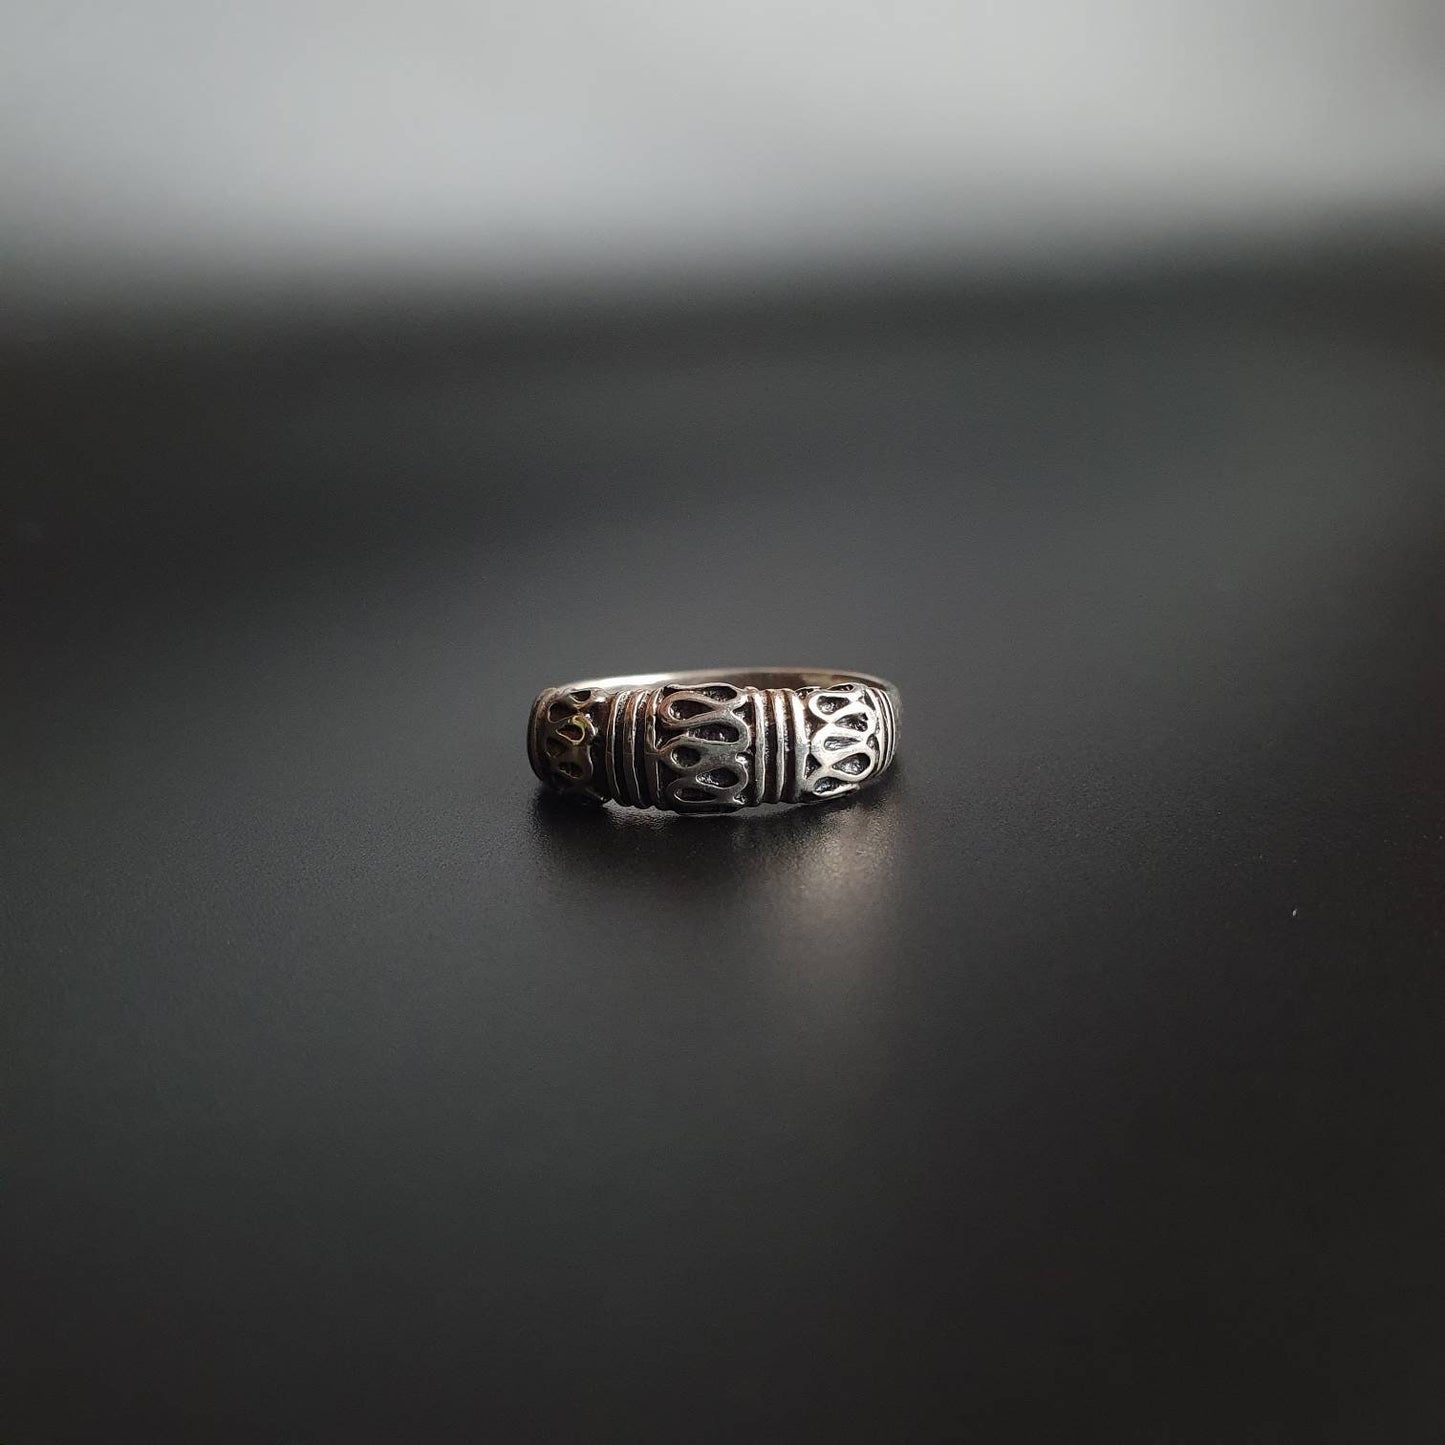 Silver ring, sterling silver jewelry,Stackable rings, statement ring, suarti ring, bohemian jewelry, gothic Ring, tribal jewelry, 925 gifts